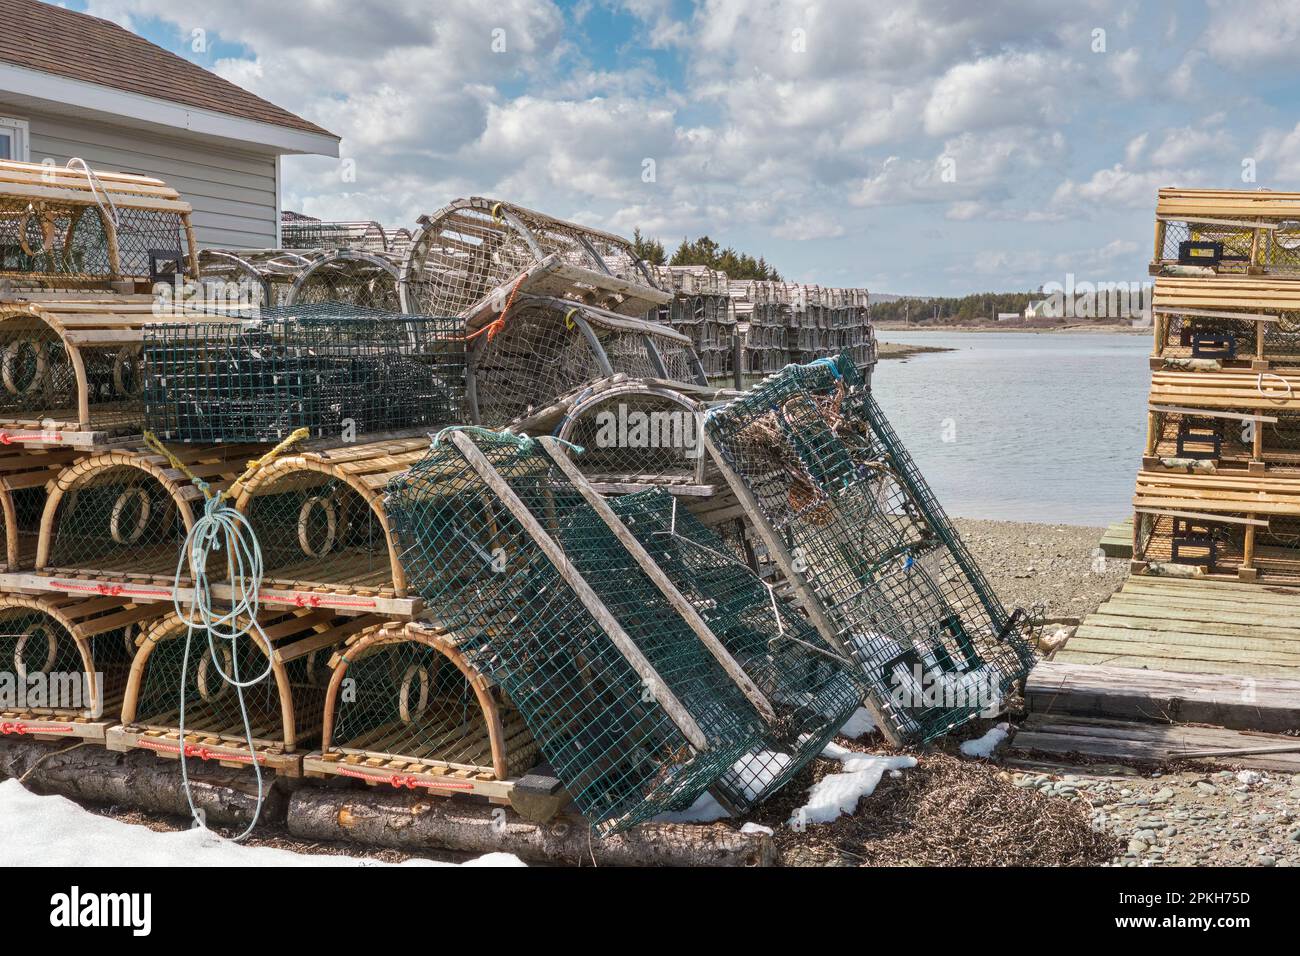 Lobster traps or pots ready for the spring lobster fishing season at Gabarus Nova Scotia. Stock Photo